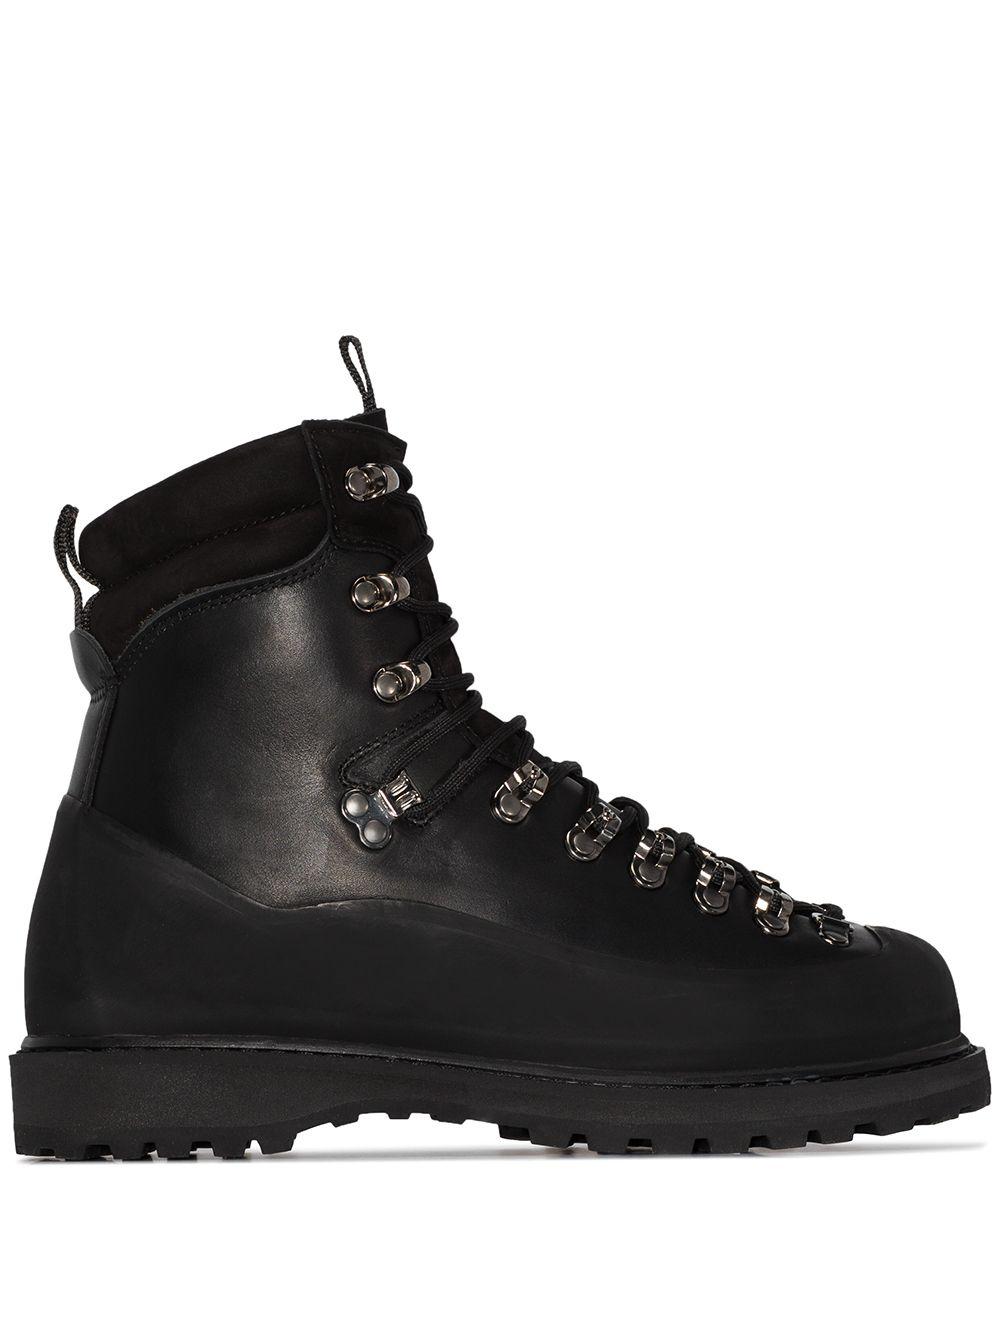 Diemme Leather Everest Hiking Boots in Black - Lyst